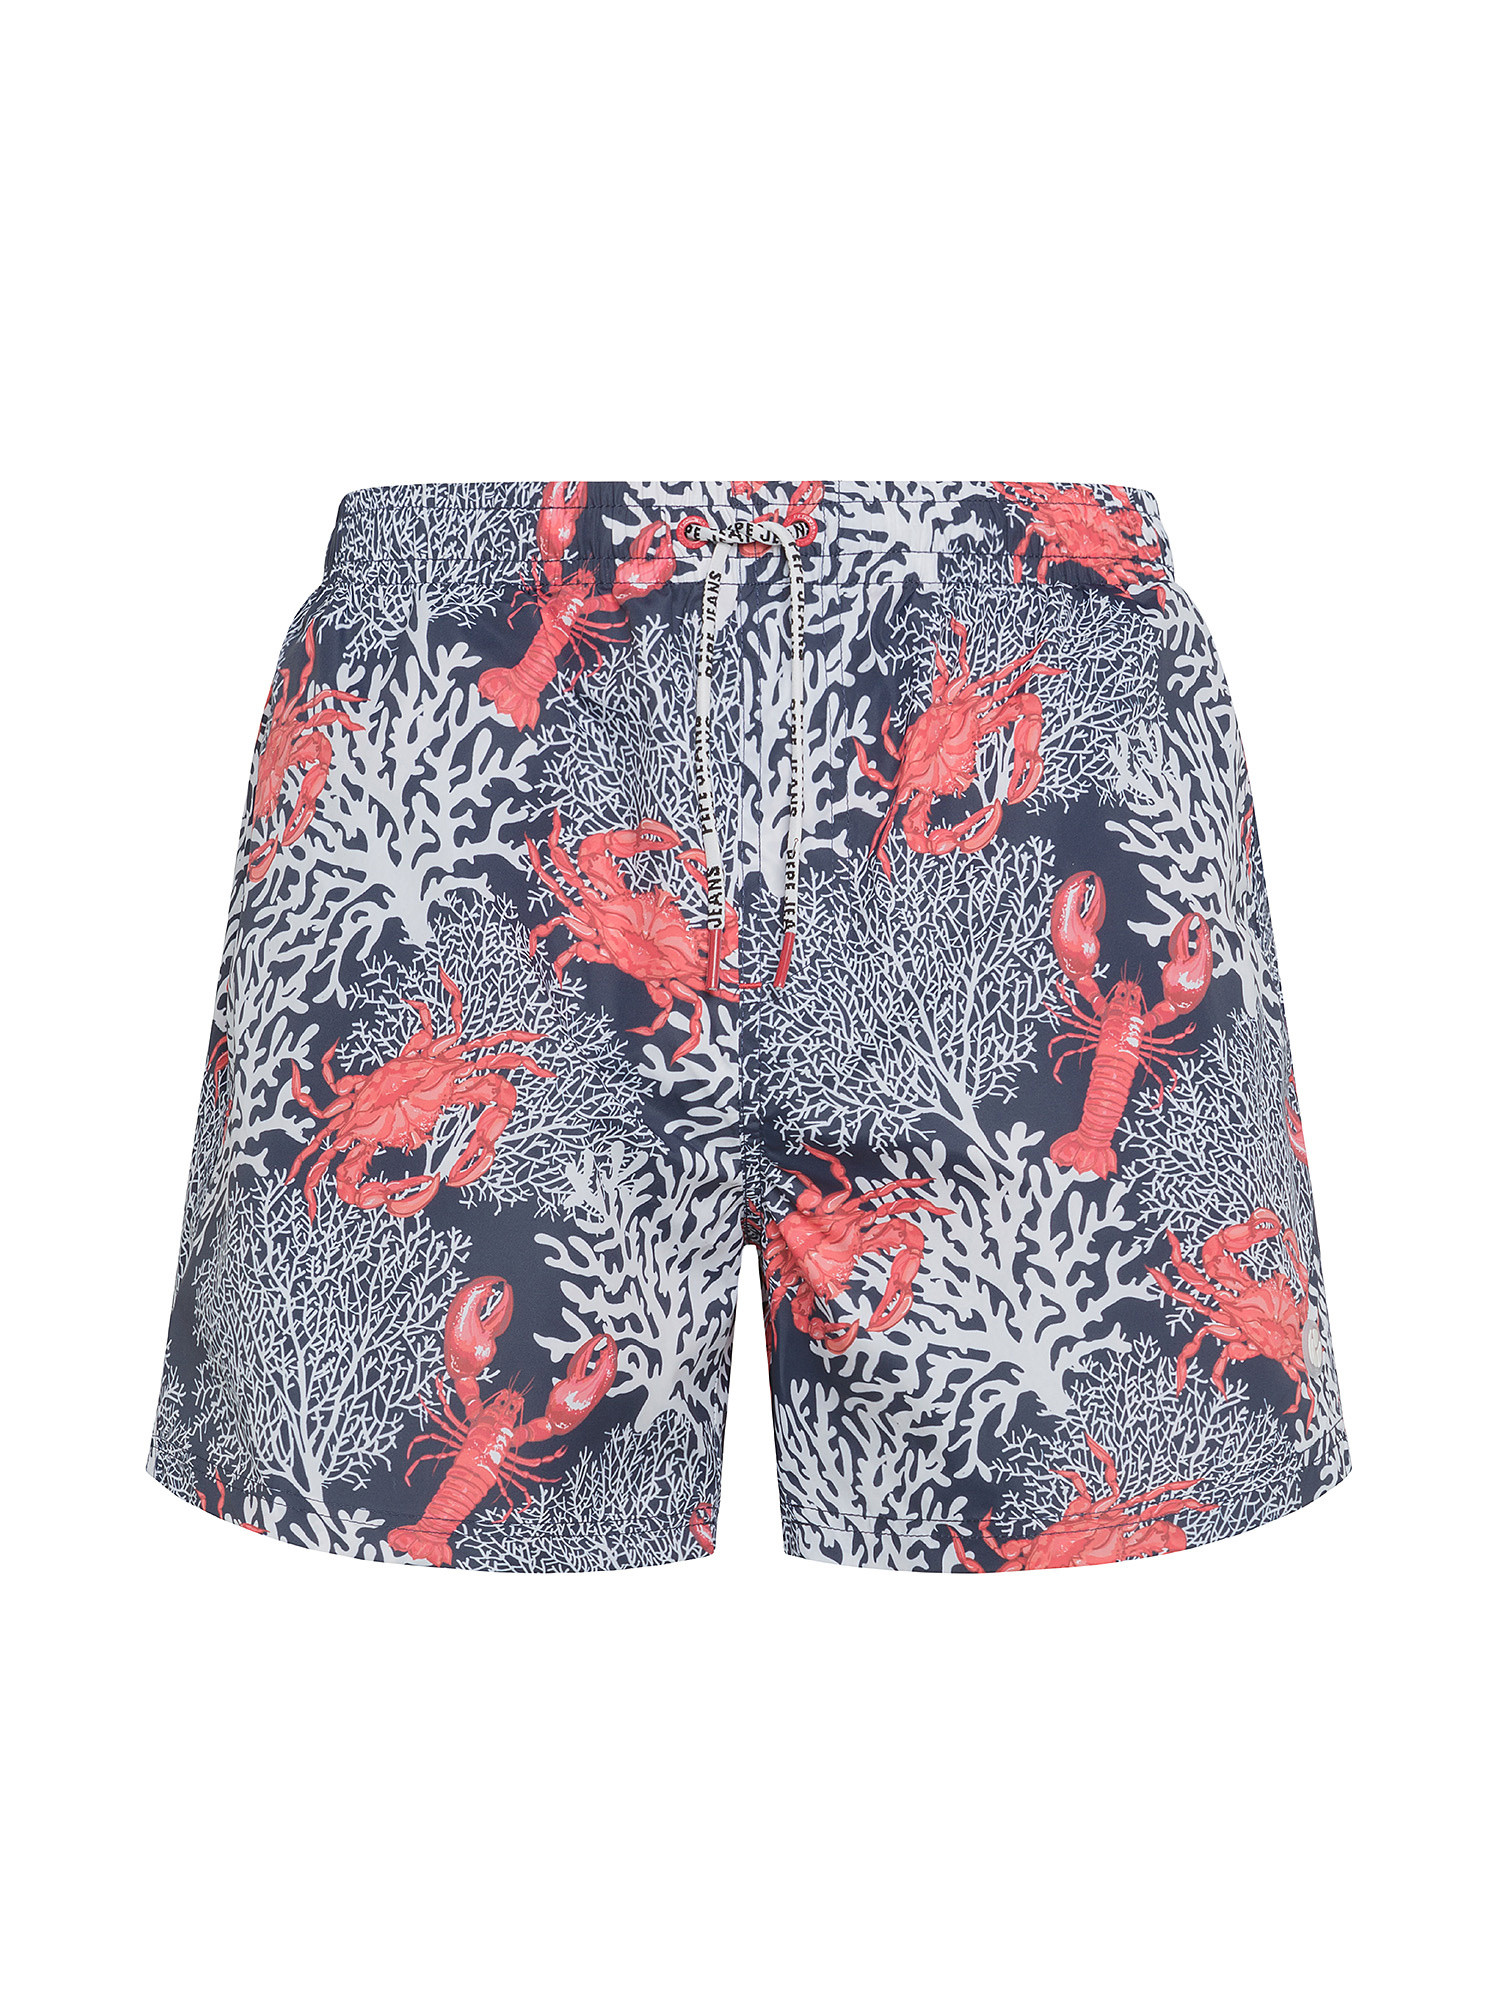 Pepe Jeans - Patterned swim trunks, Multicolor, large image number 0